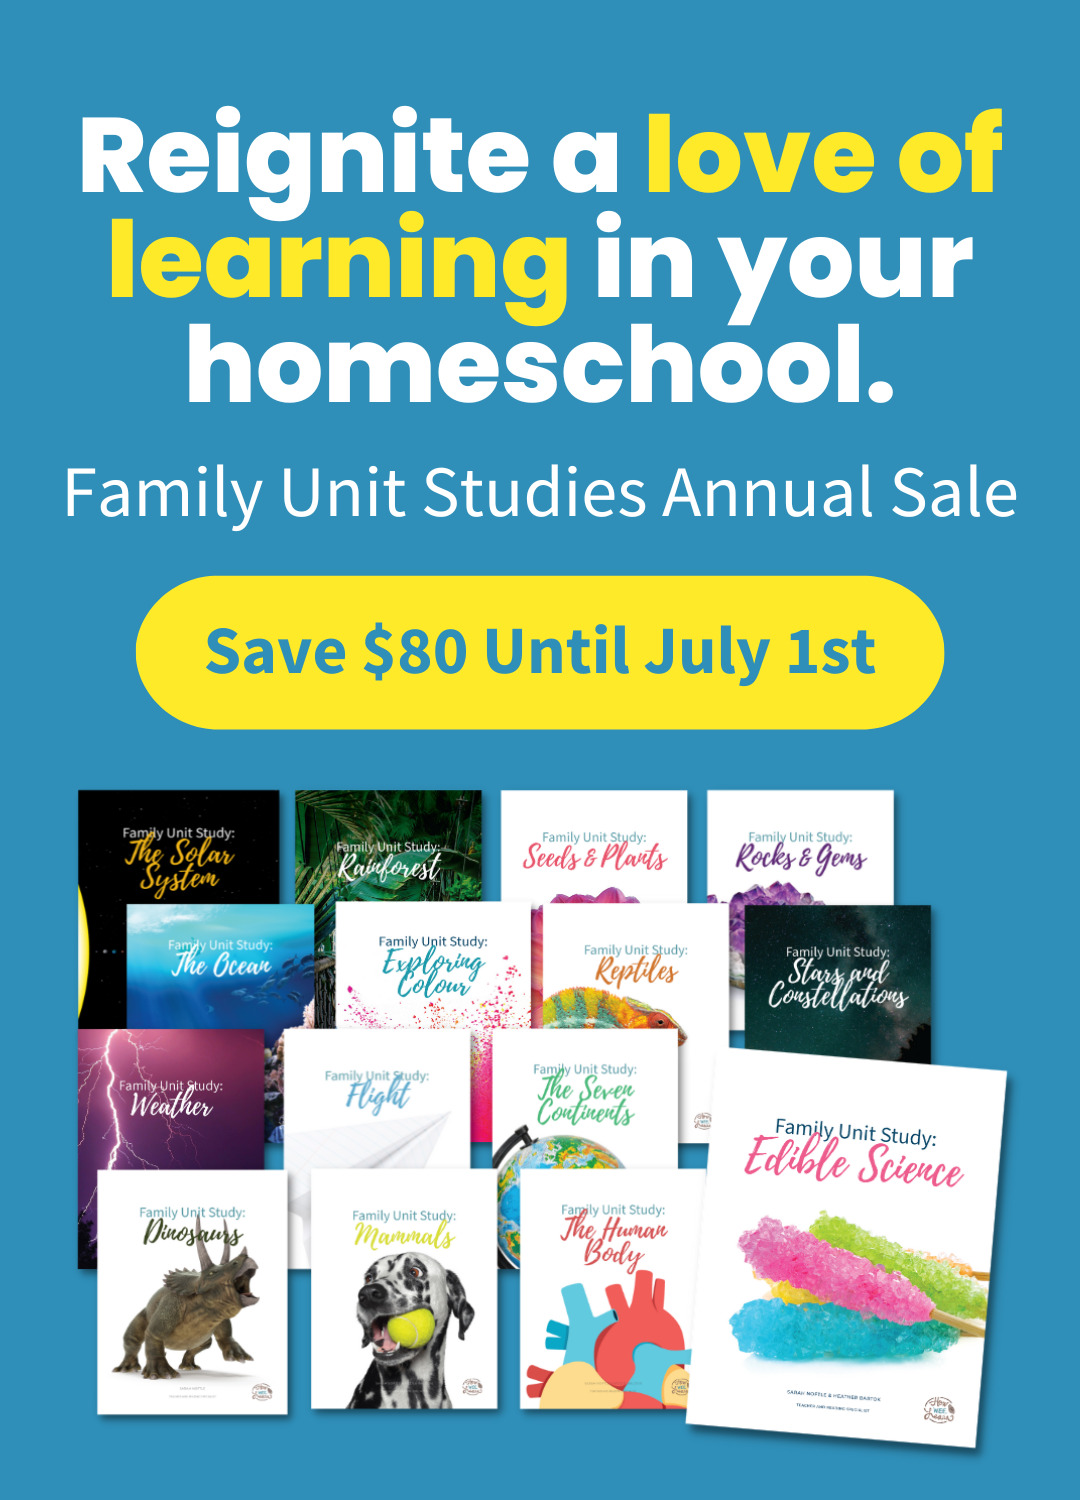 Reignite a love of learning in your homeschool. Family Unit Studies Annual Sale: Save $80 Until July 1st